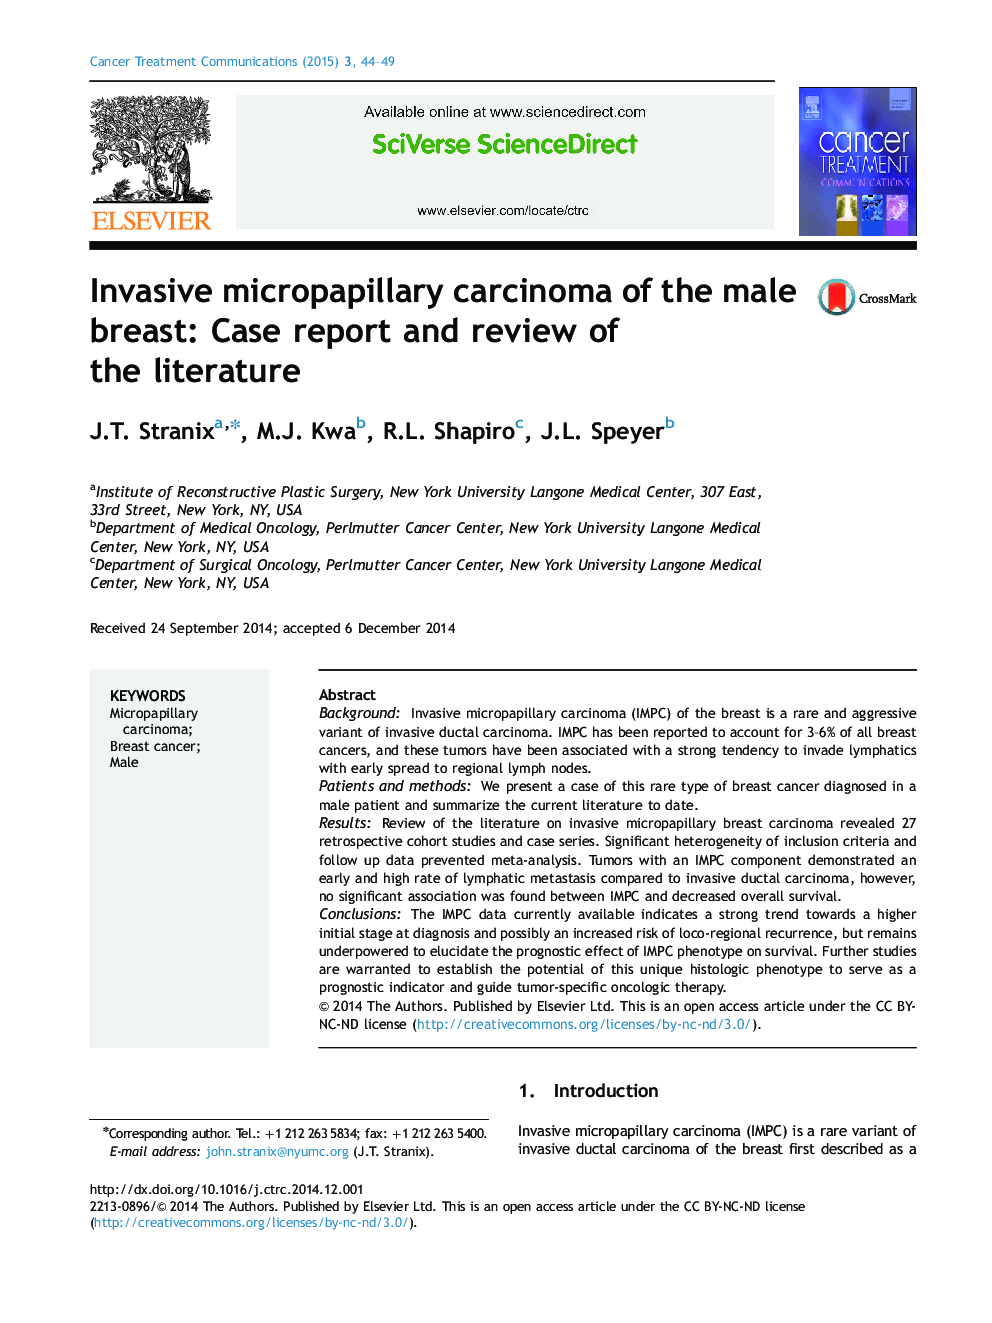 Invasive micropapillary carcinoma of the male breast: Case report and review of the literature